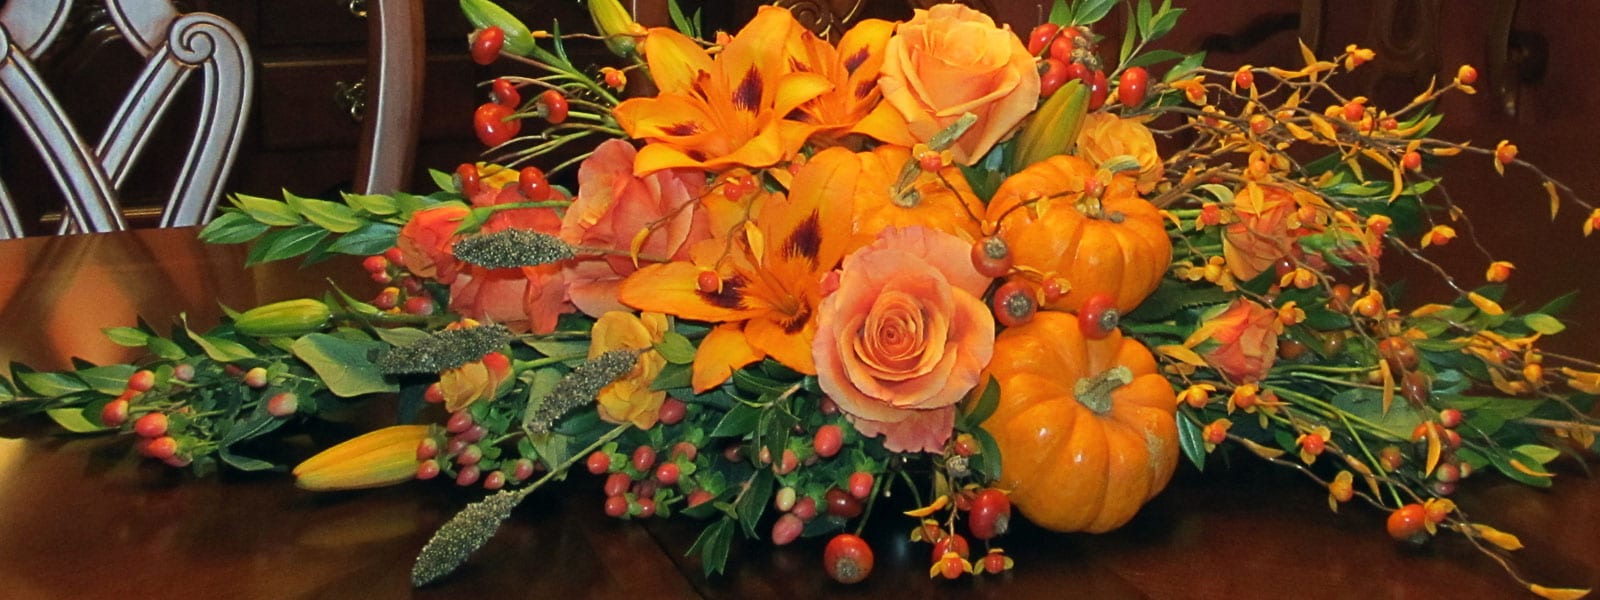 Flowers for the Thanksgiving table 